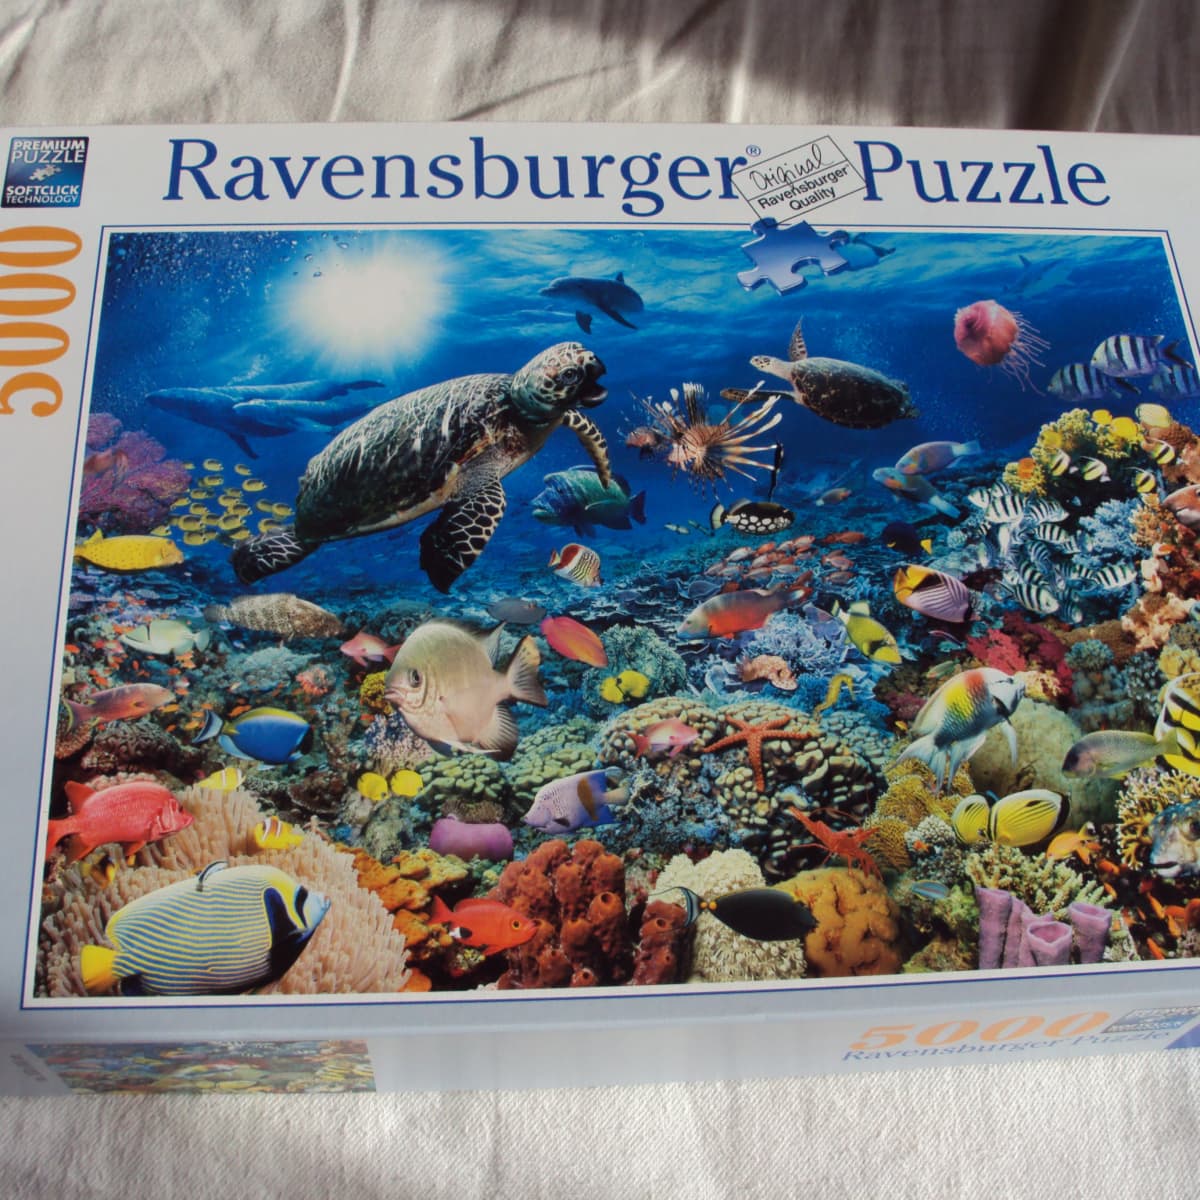 Puzzles 5000 Pieces for Adults Tanks and Planes Softclick Technology Means Pieces Fit Together Perfectly